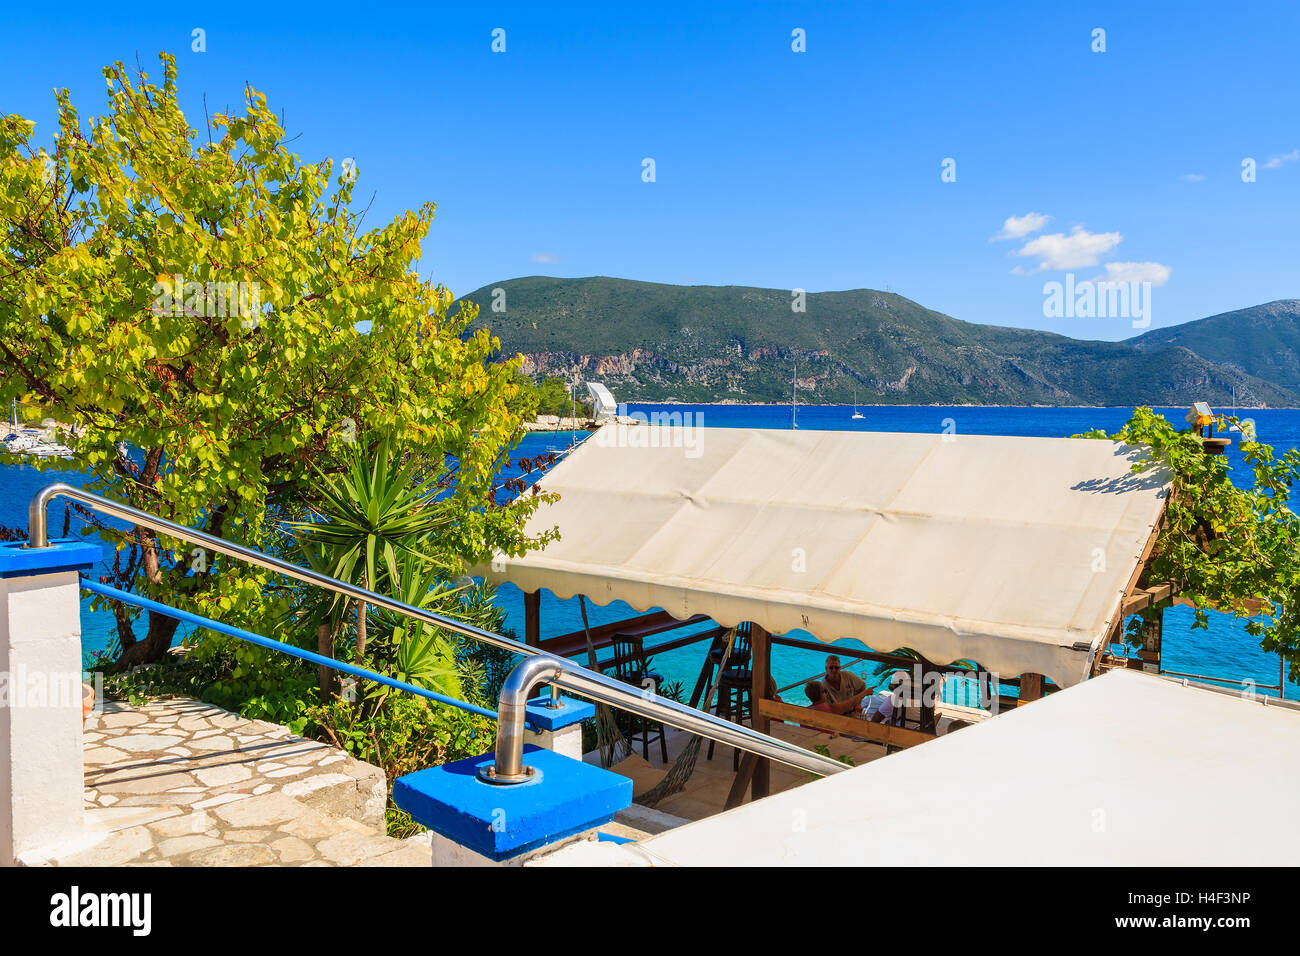 FISKARDO, KEFALONIA - SEP 18, 2014: Traditional Greek tavern in Fiskardo port, Kefalonia island, Greece. Greece is famous for great food and sunny weather. Stock Photo